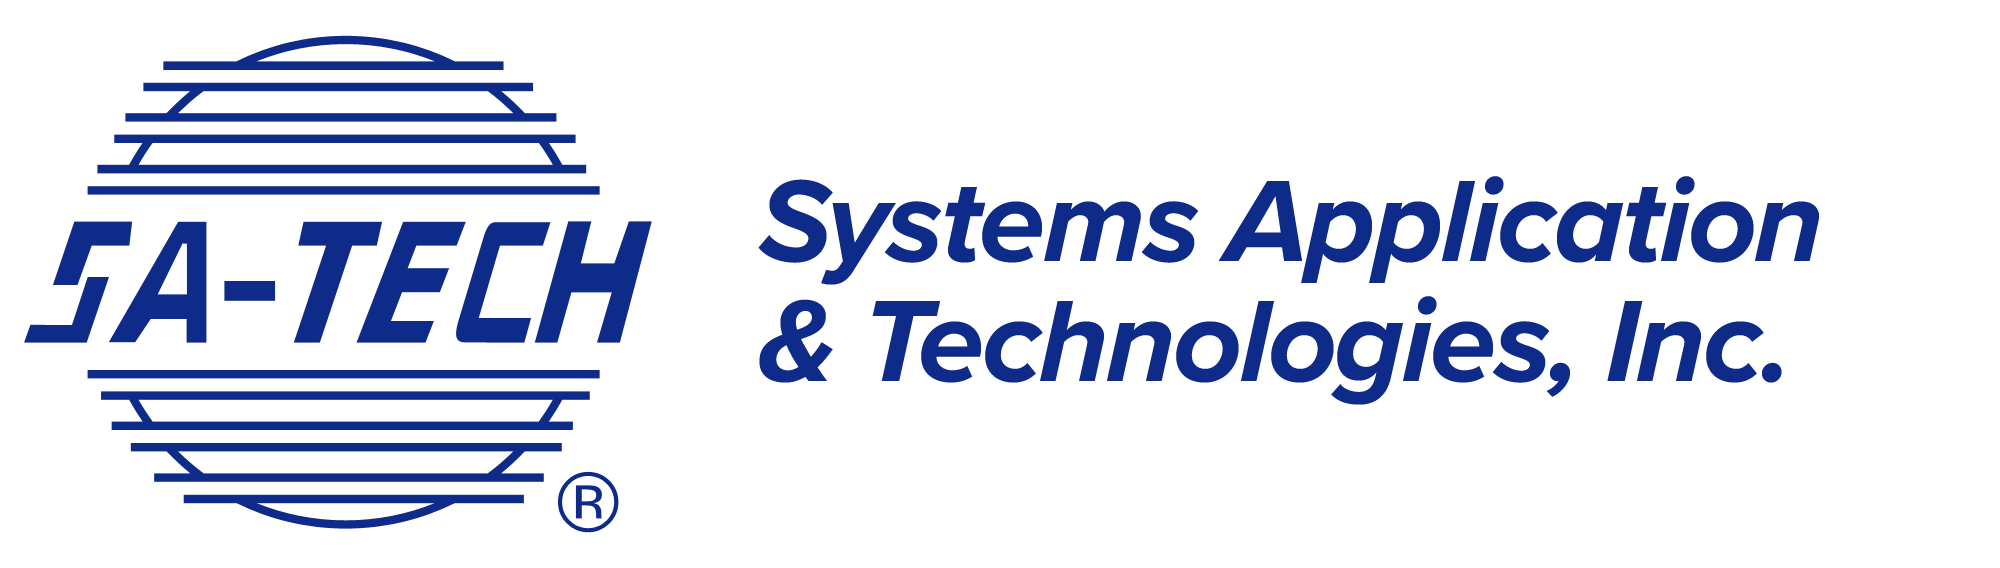 Systems Application & Technologies